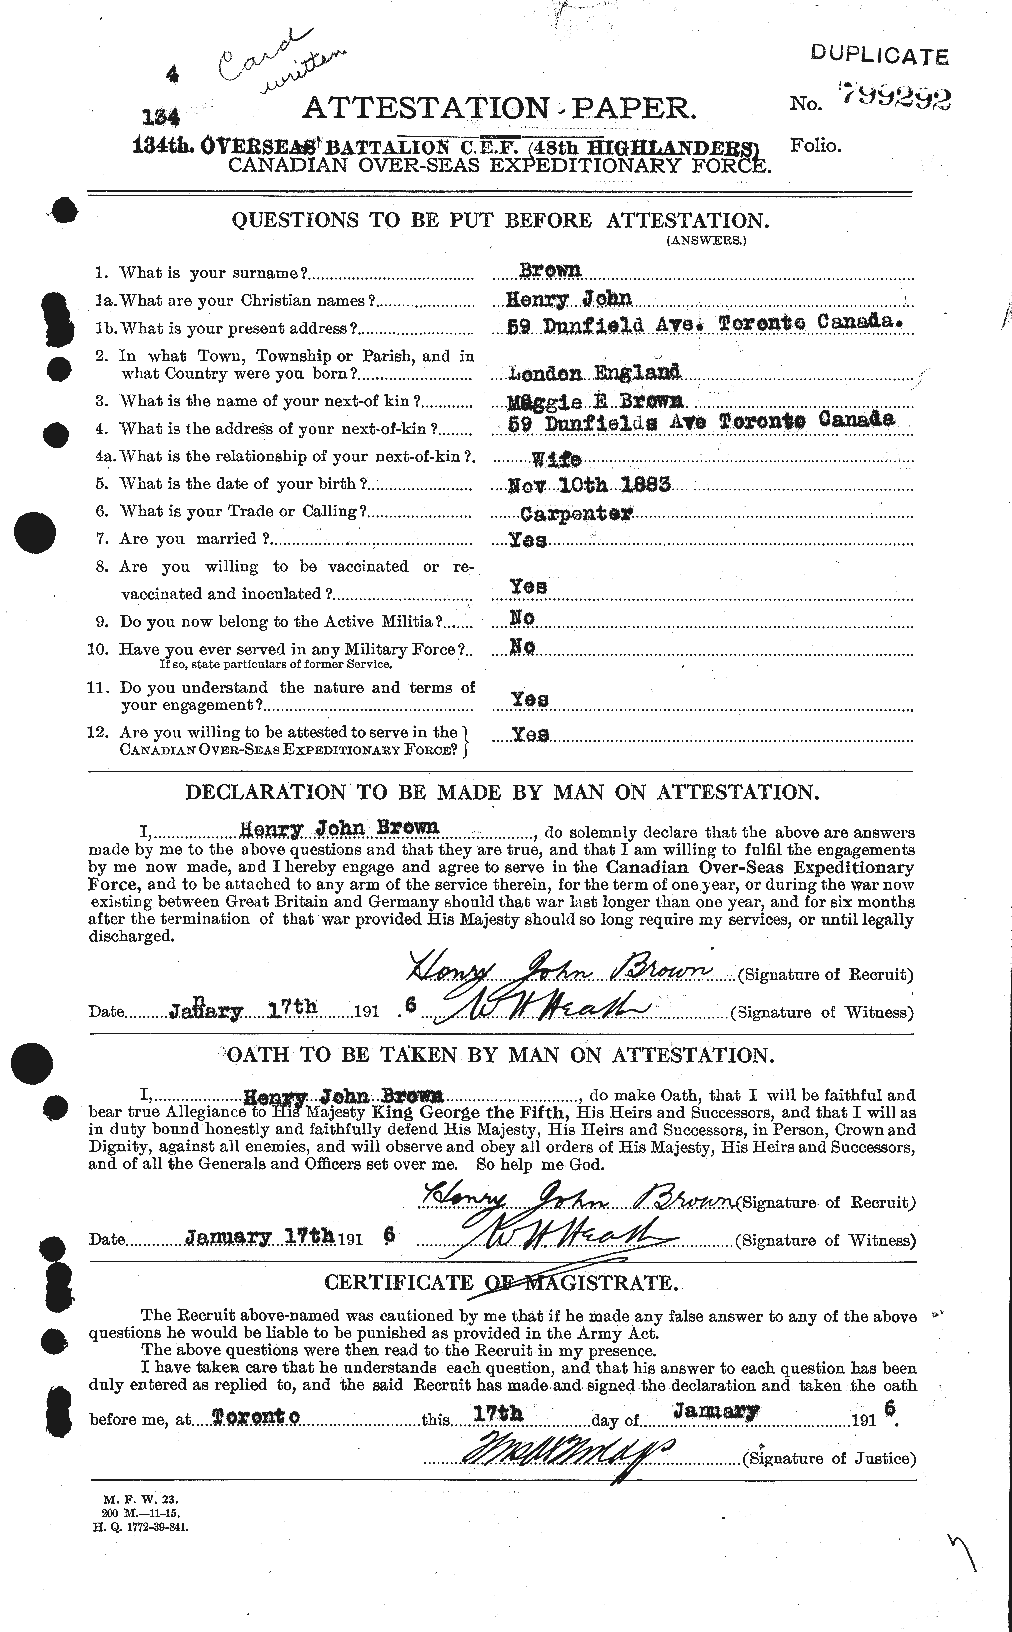 Personnel Records of the First World War - CEF 265530a